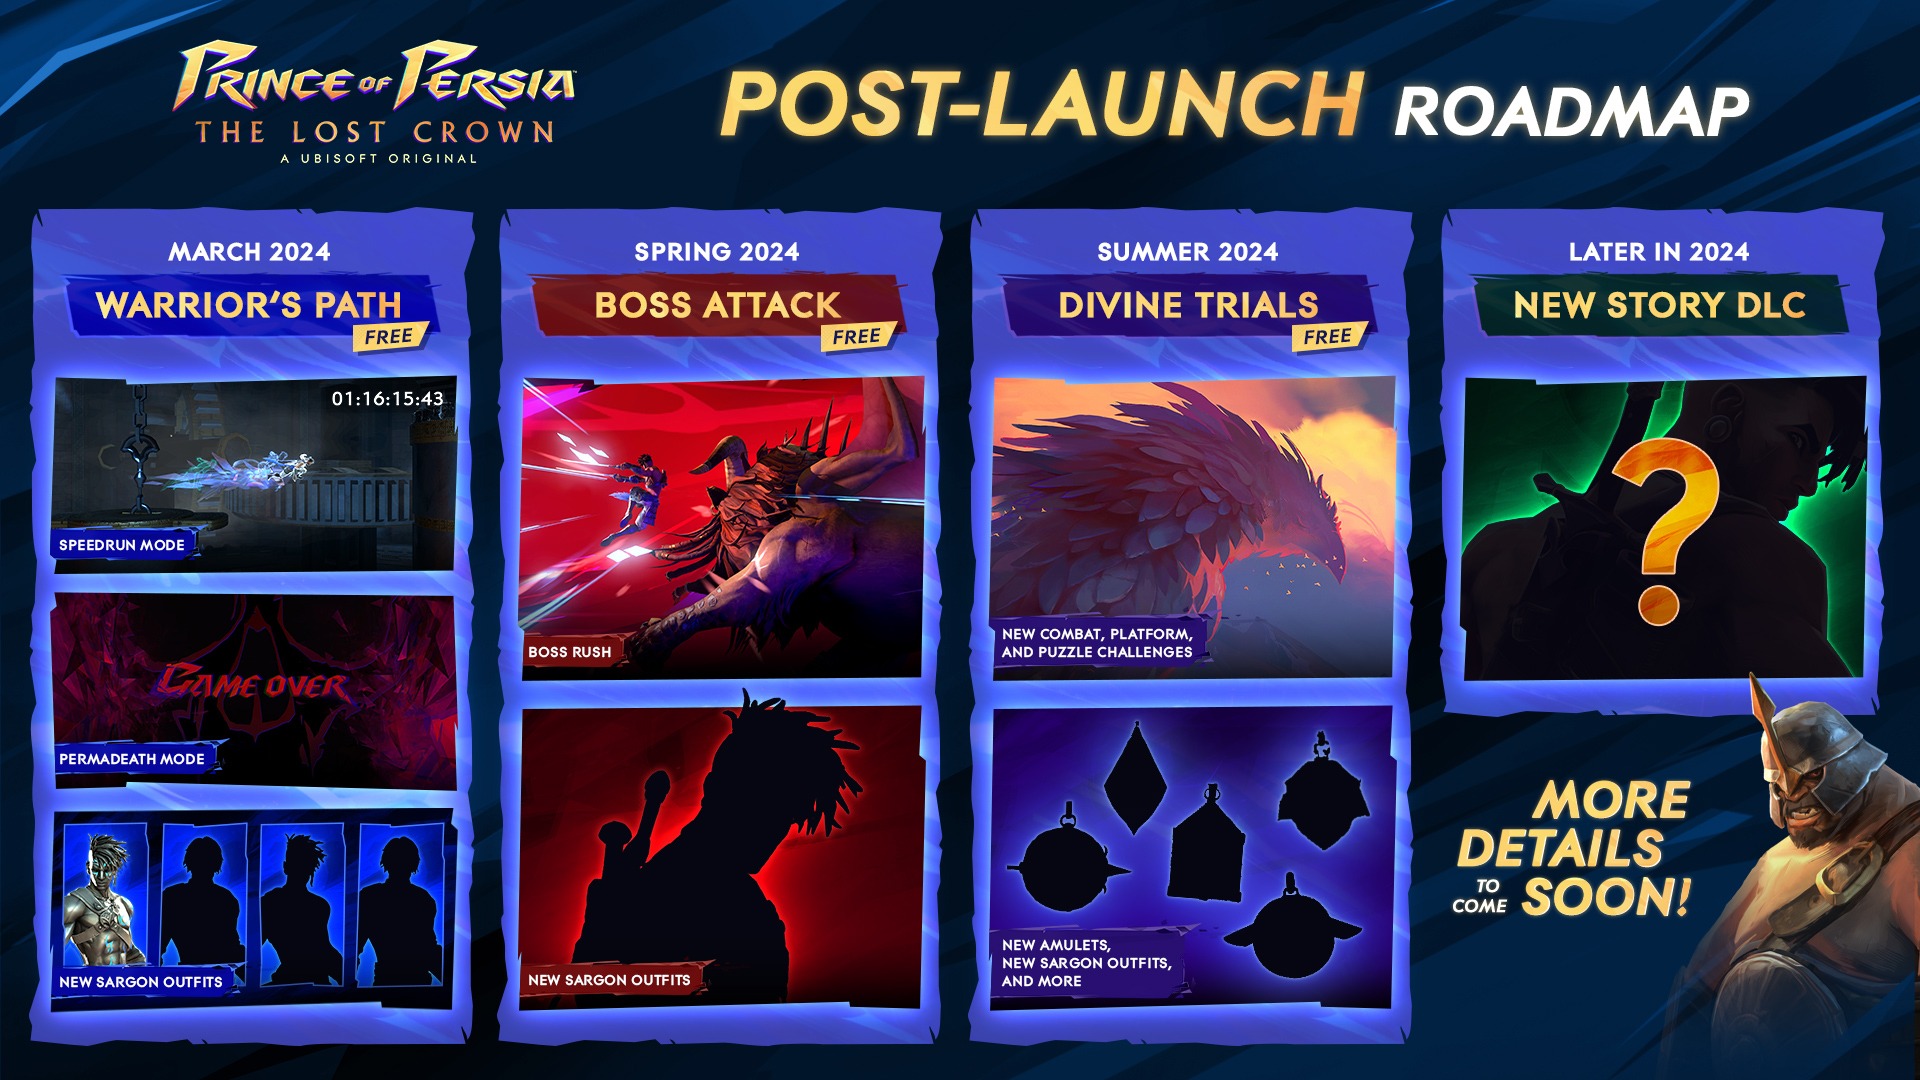 Feuille-de-route-DLC-2024-Prince-of-Persia-The-Lost-Crown